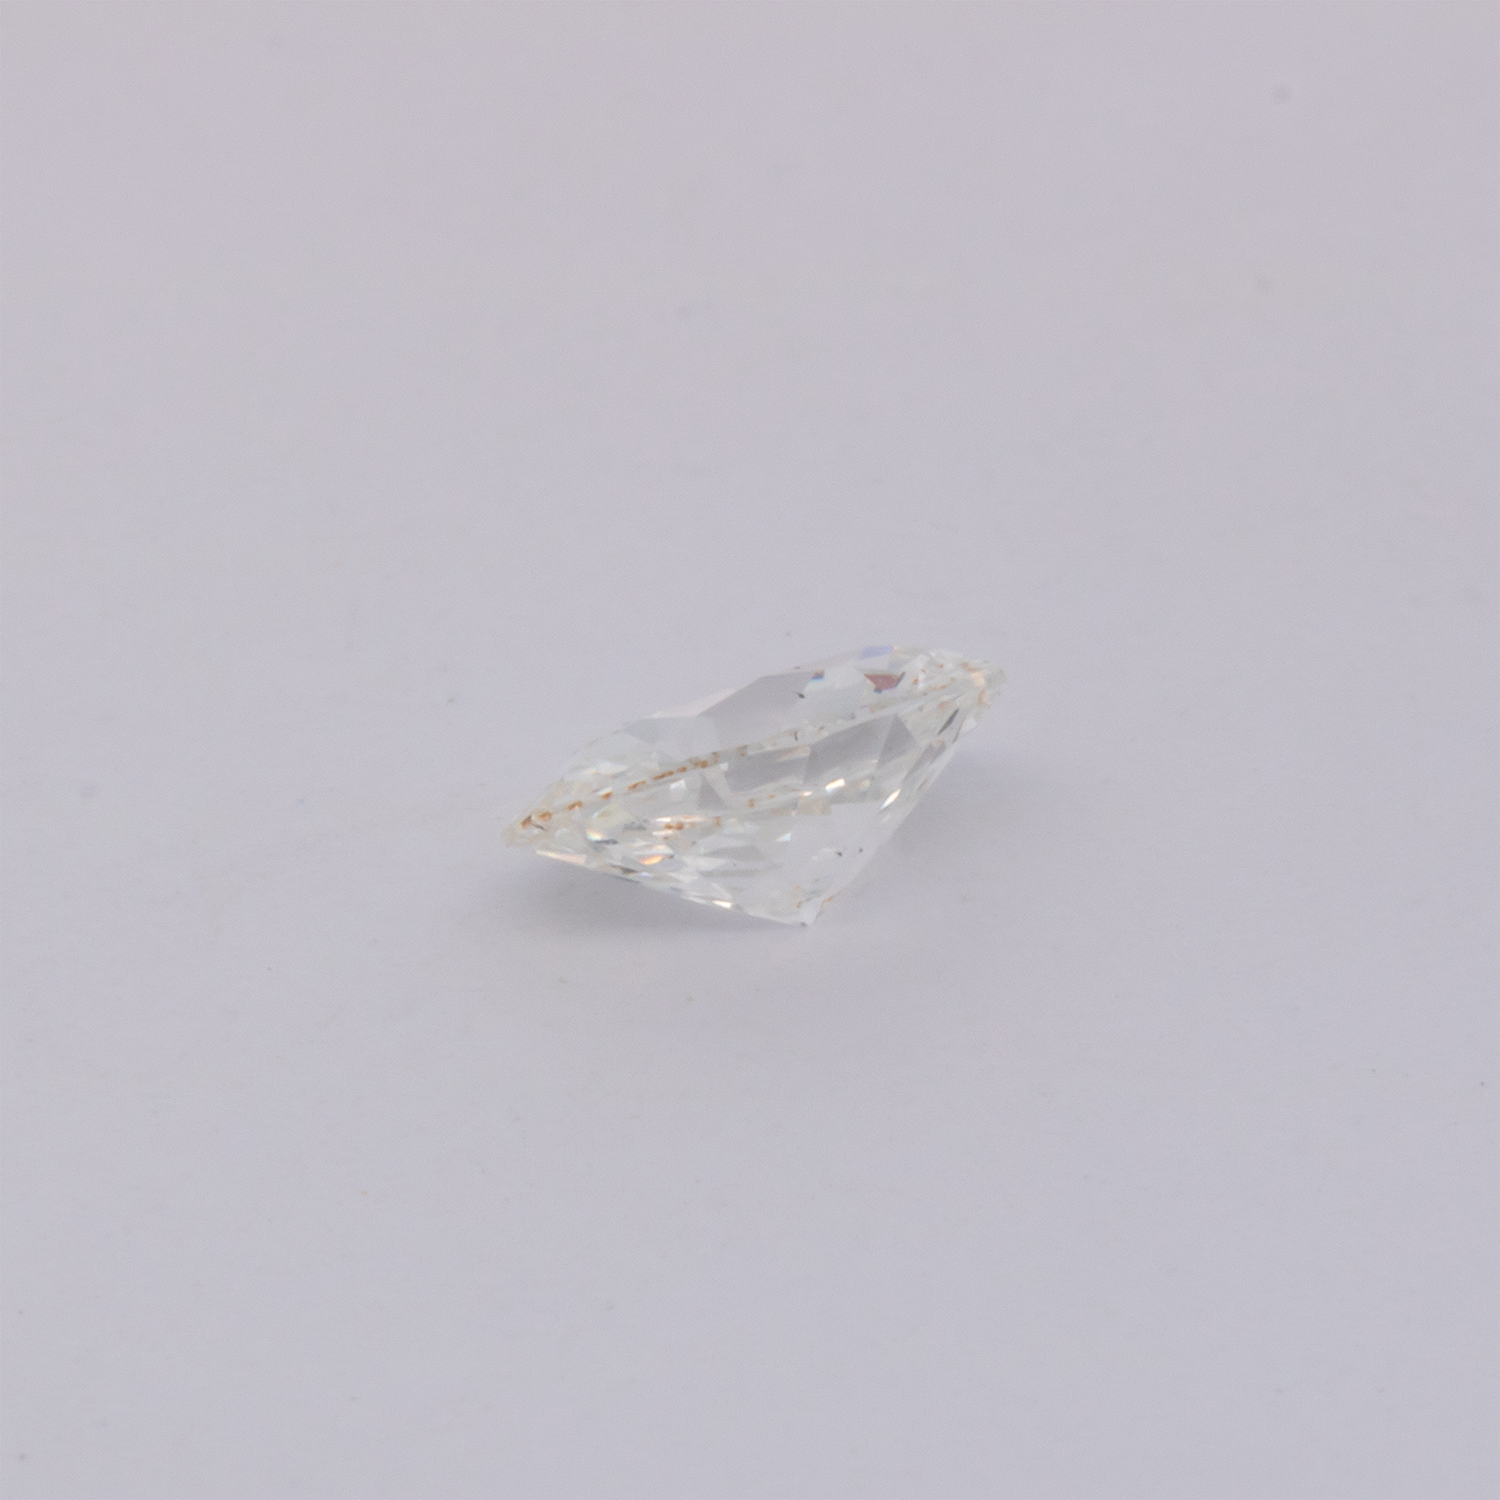 Diamant - weiß, oval, 5.7x3.8 mm, 0.36 cts, Nr. DT1014